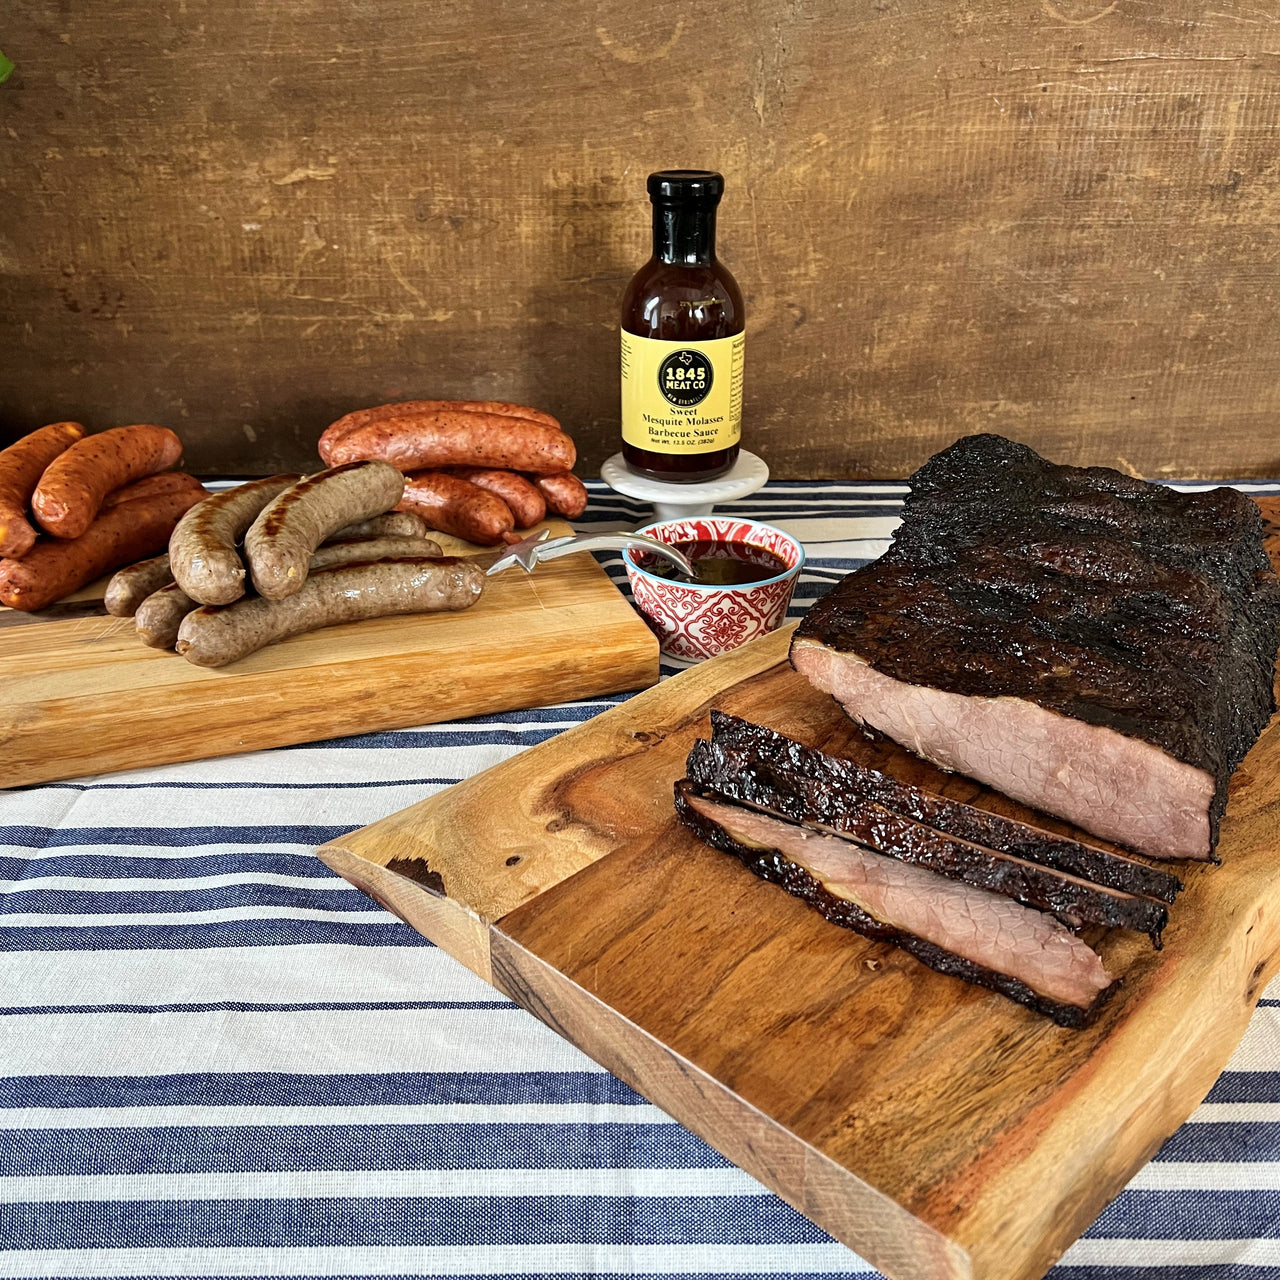 An assortment of items that will make your next gathering or picnic a success.  Includes:  4 - 6 lbs. Smoked Beef Brisket 16 oz. Smoked Pork & Beef Sausage 16 oz. Bratwurst 16 oz. Smoked Cheddar Sausage 13.5 oz. Jar of Sweet Molasses BBQ Sauce ﻿Item #80E